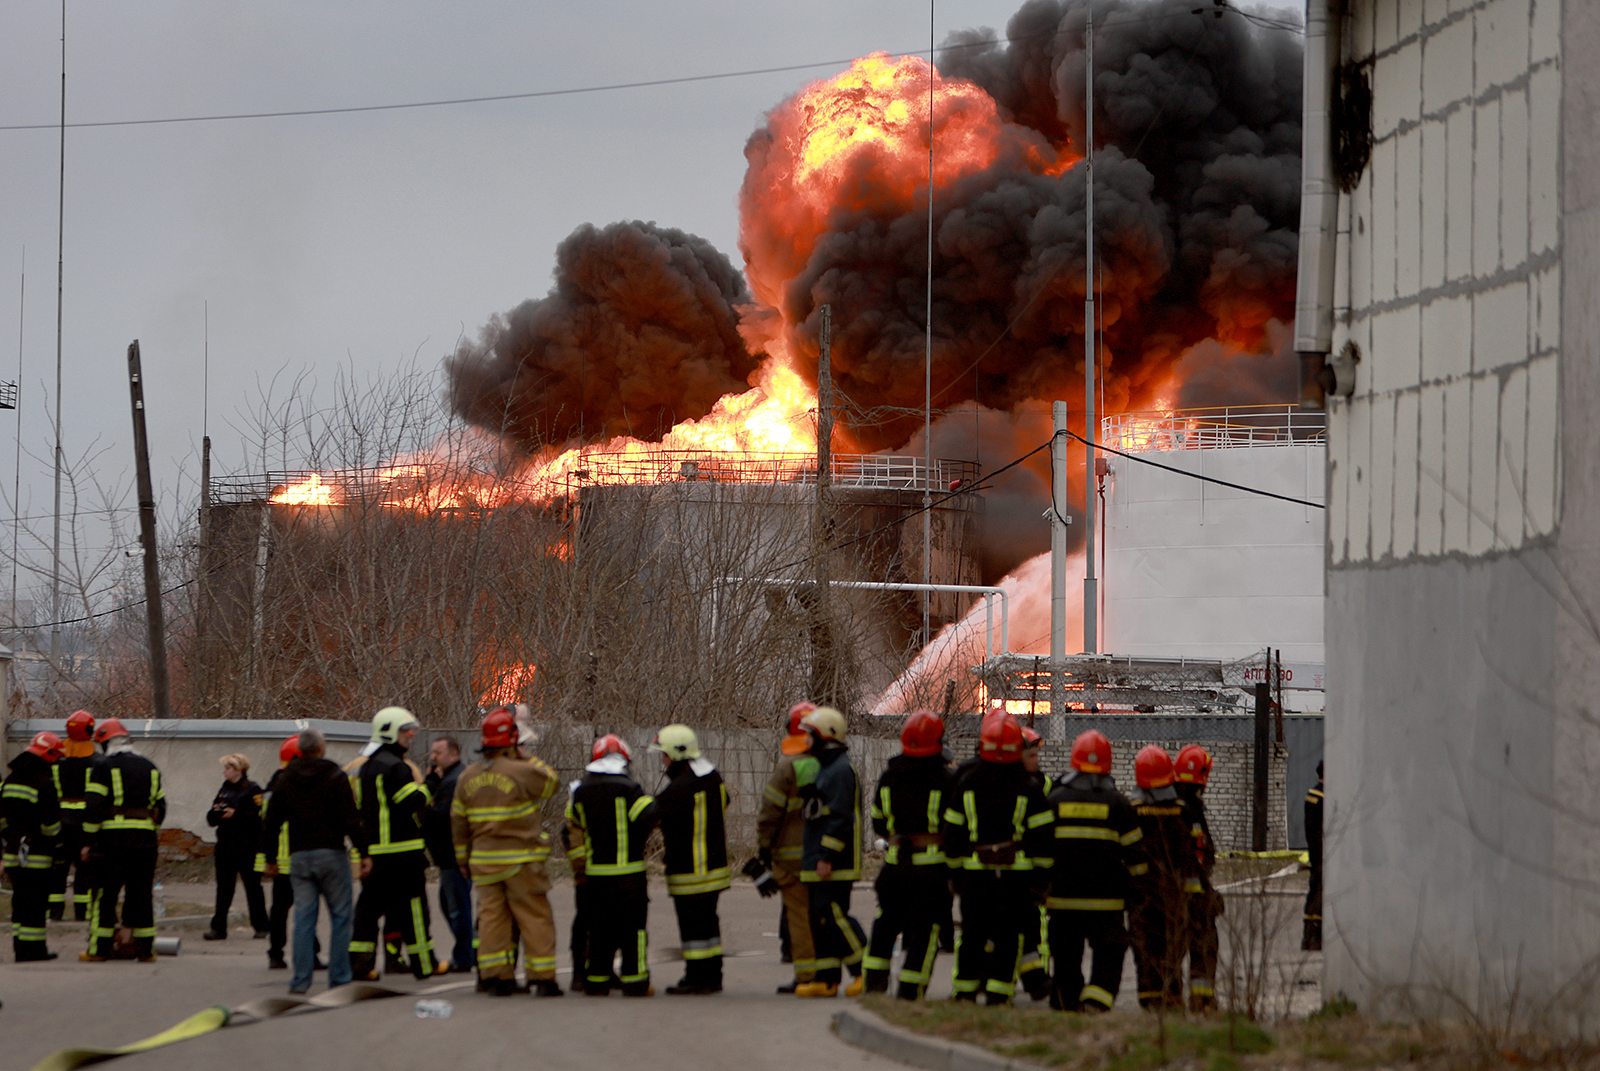 Firefighters battle a blaze at an industrial facility after a Russian military attack in the area on March 26, in Lviv, Ukraine. 